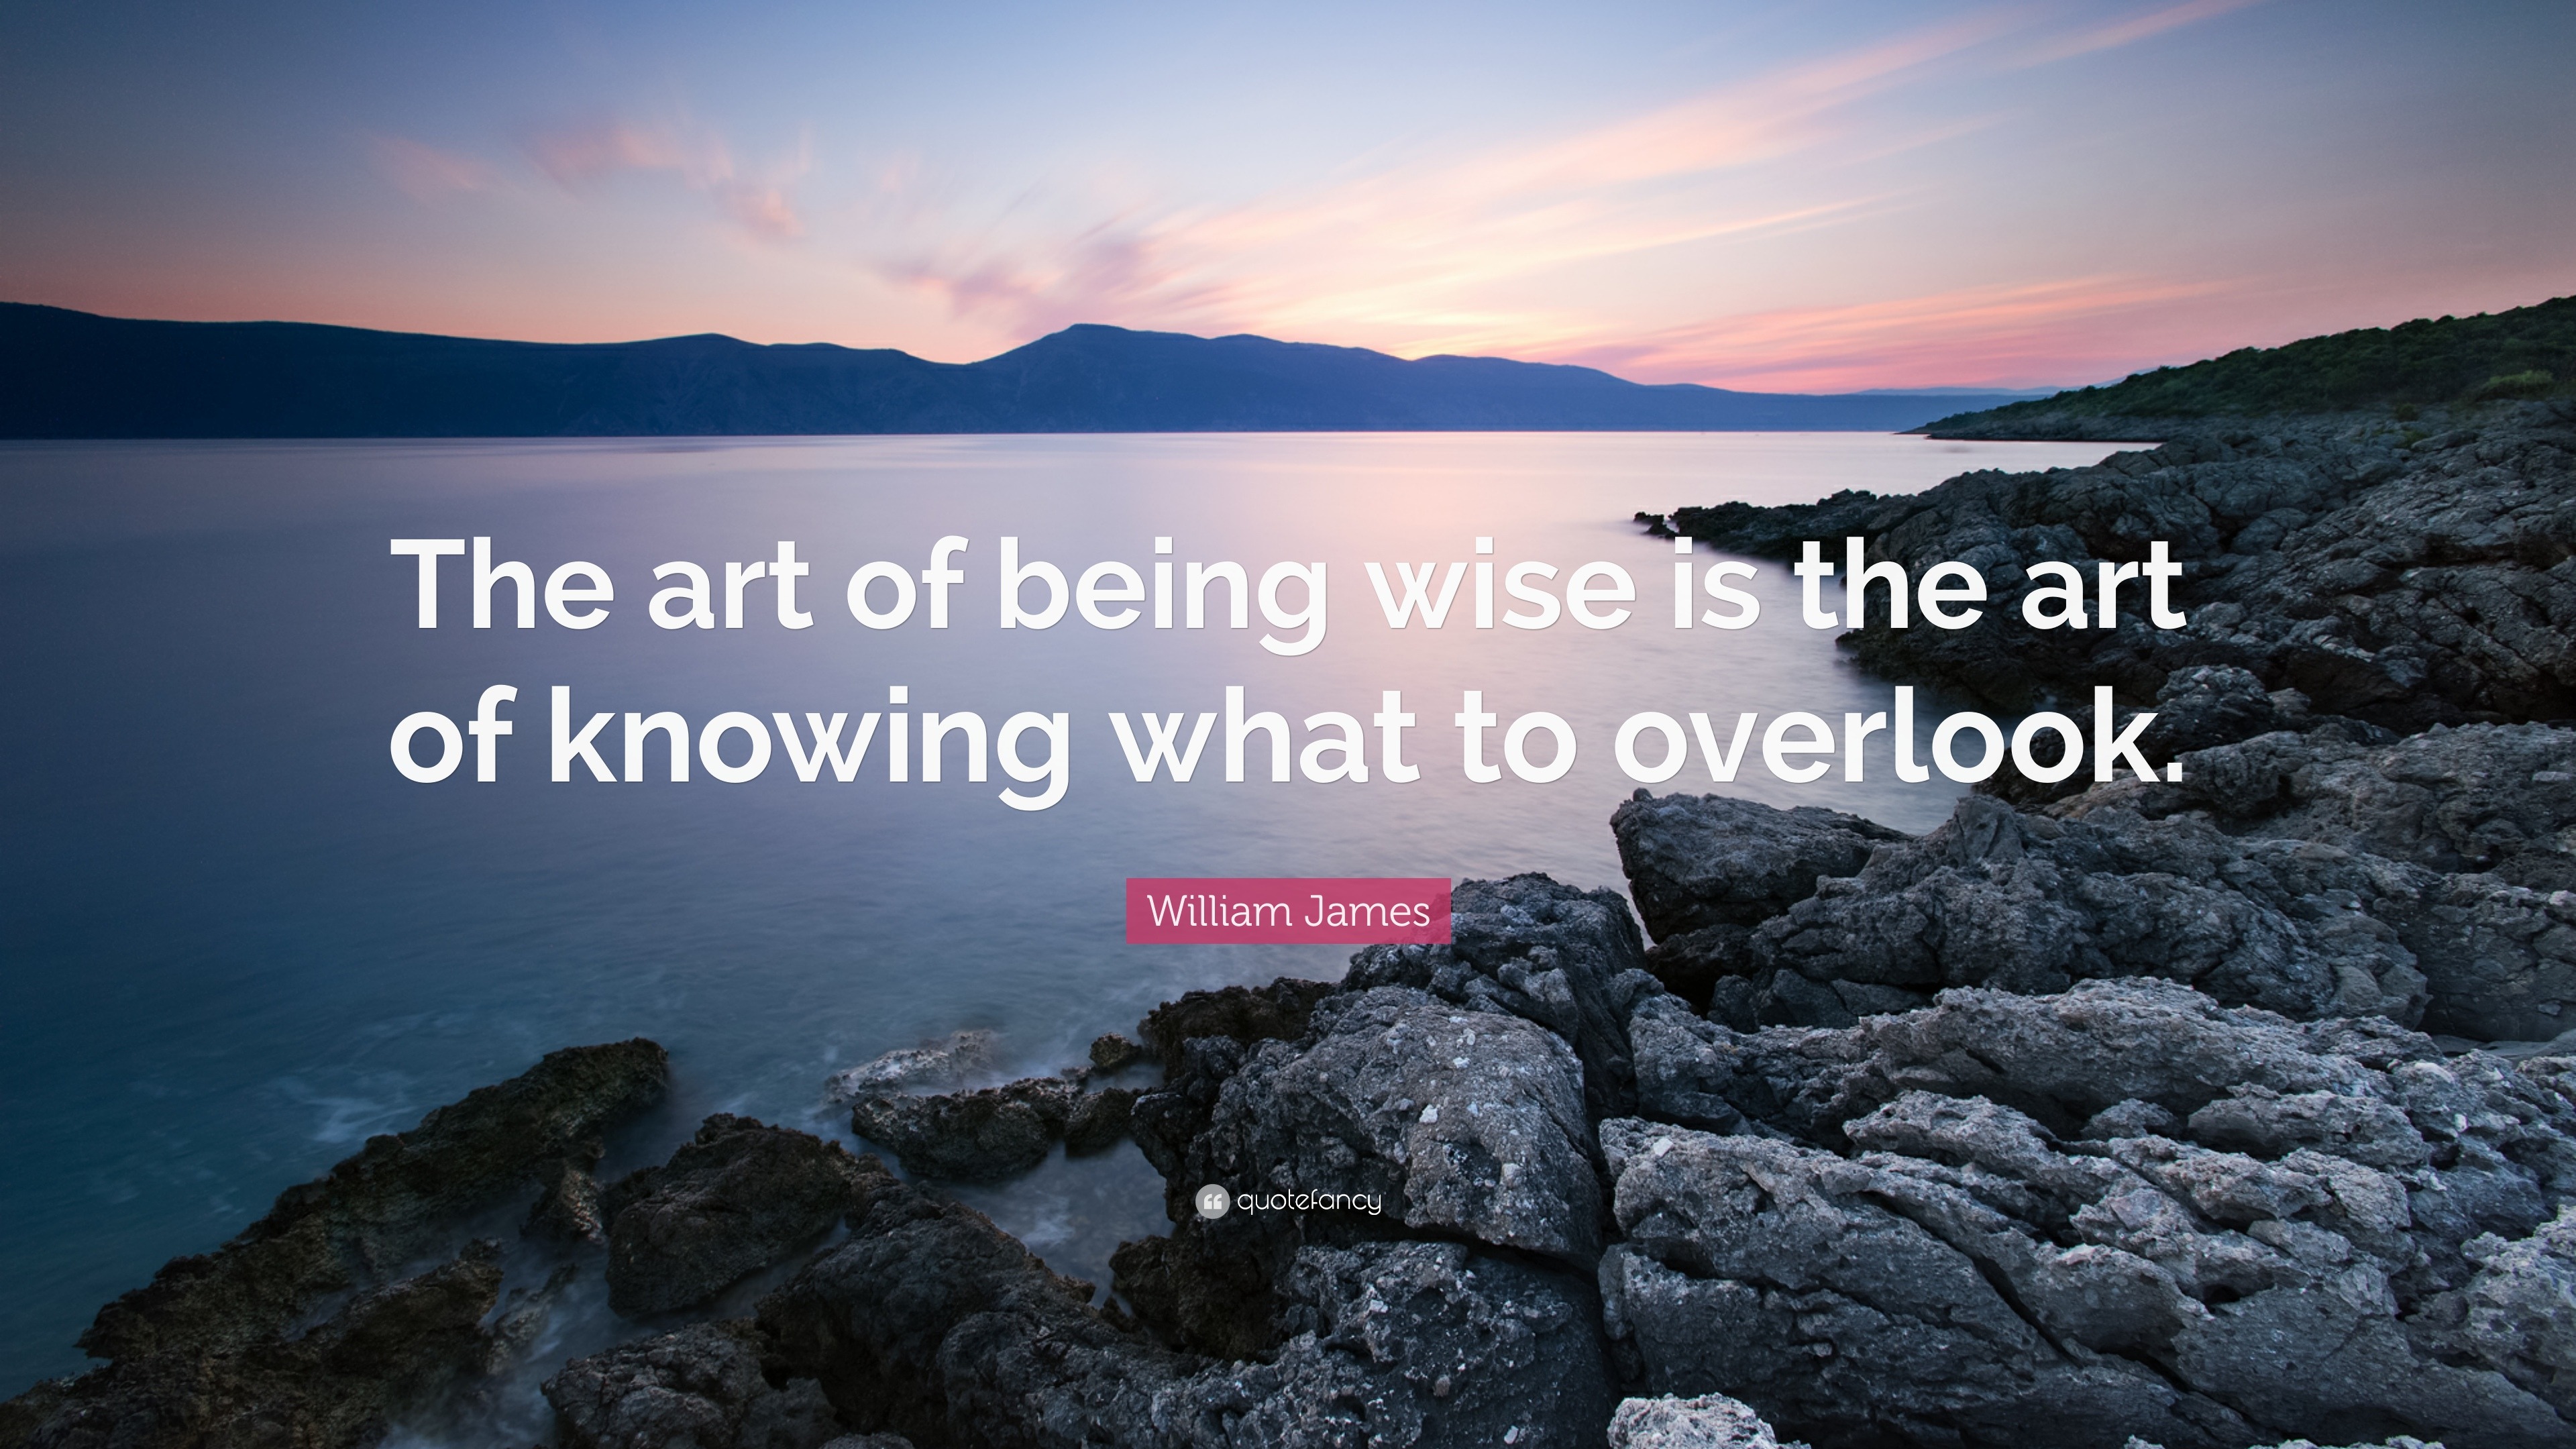 william james quotes�  Williams james, Strong quotes, Quotes